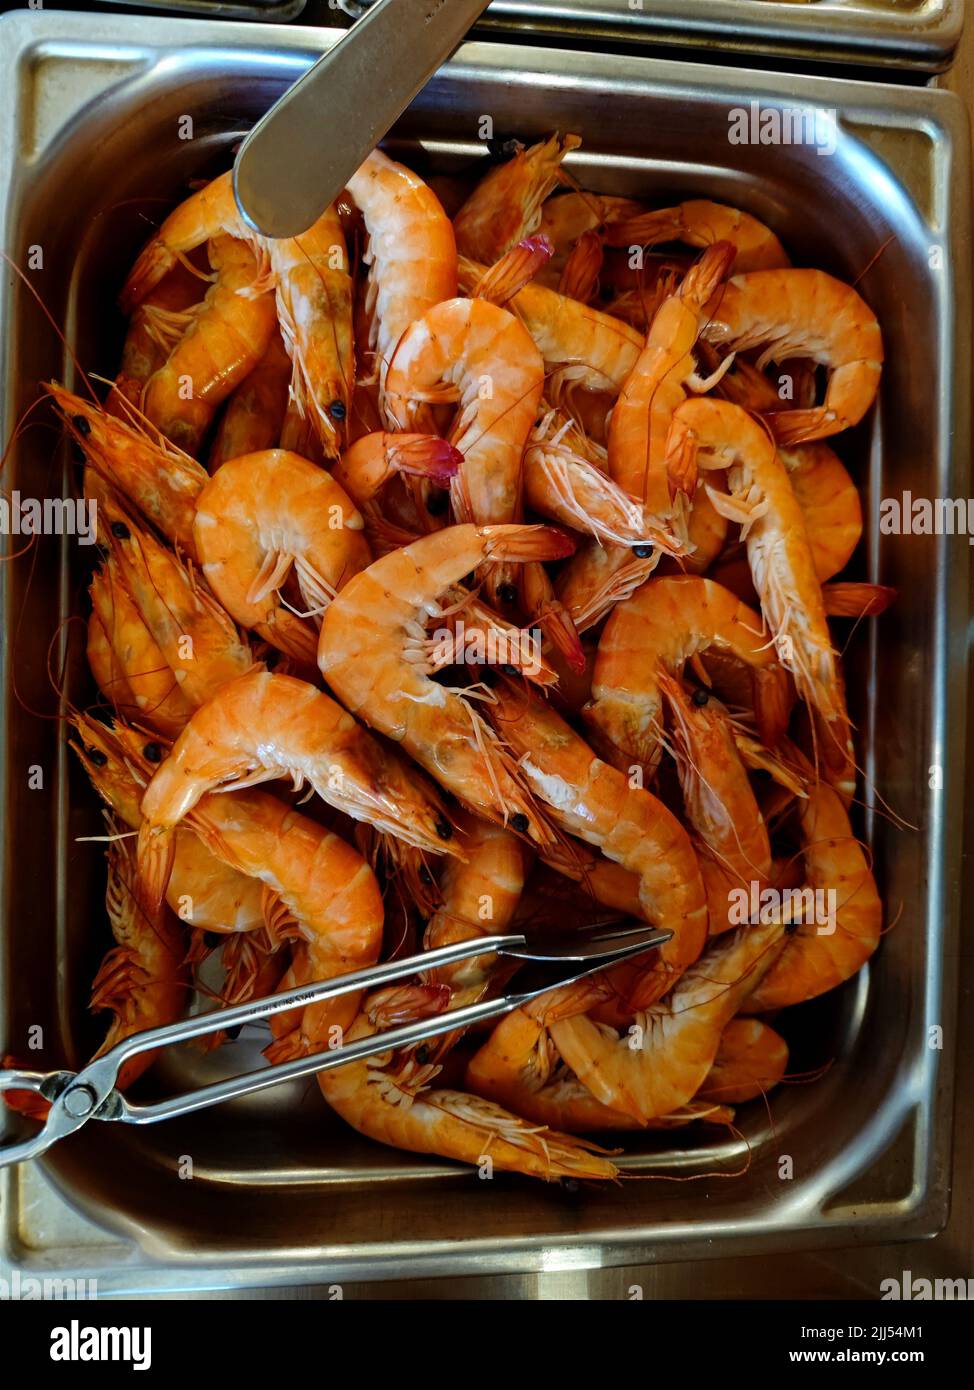 Beautifully colored prawns in a cooled container in a restaurant Stock Photo